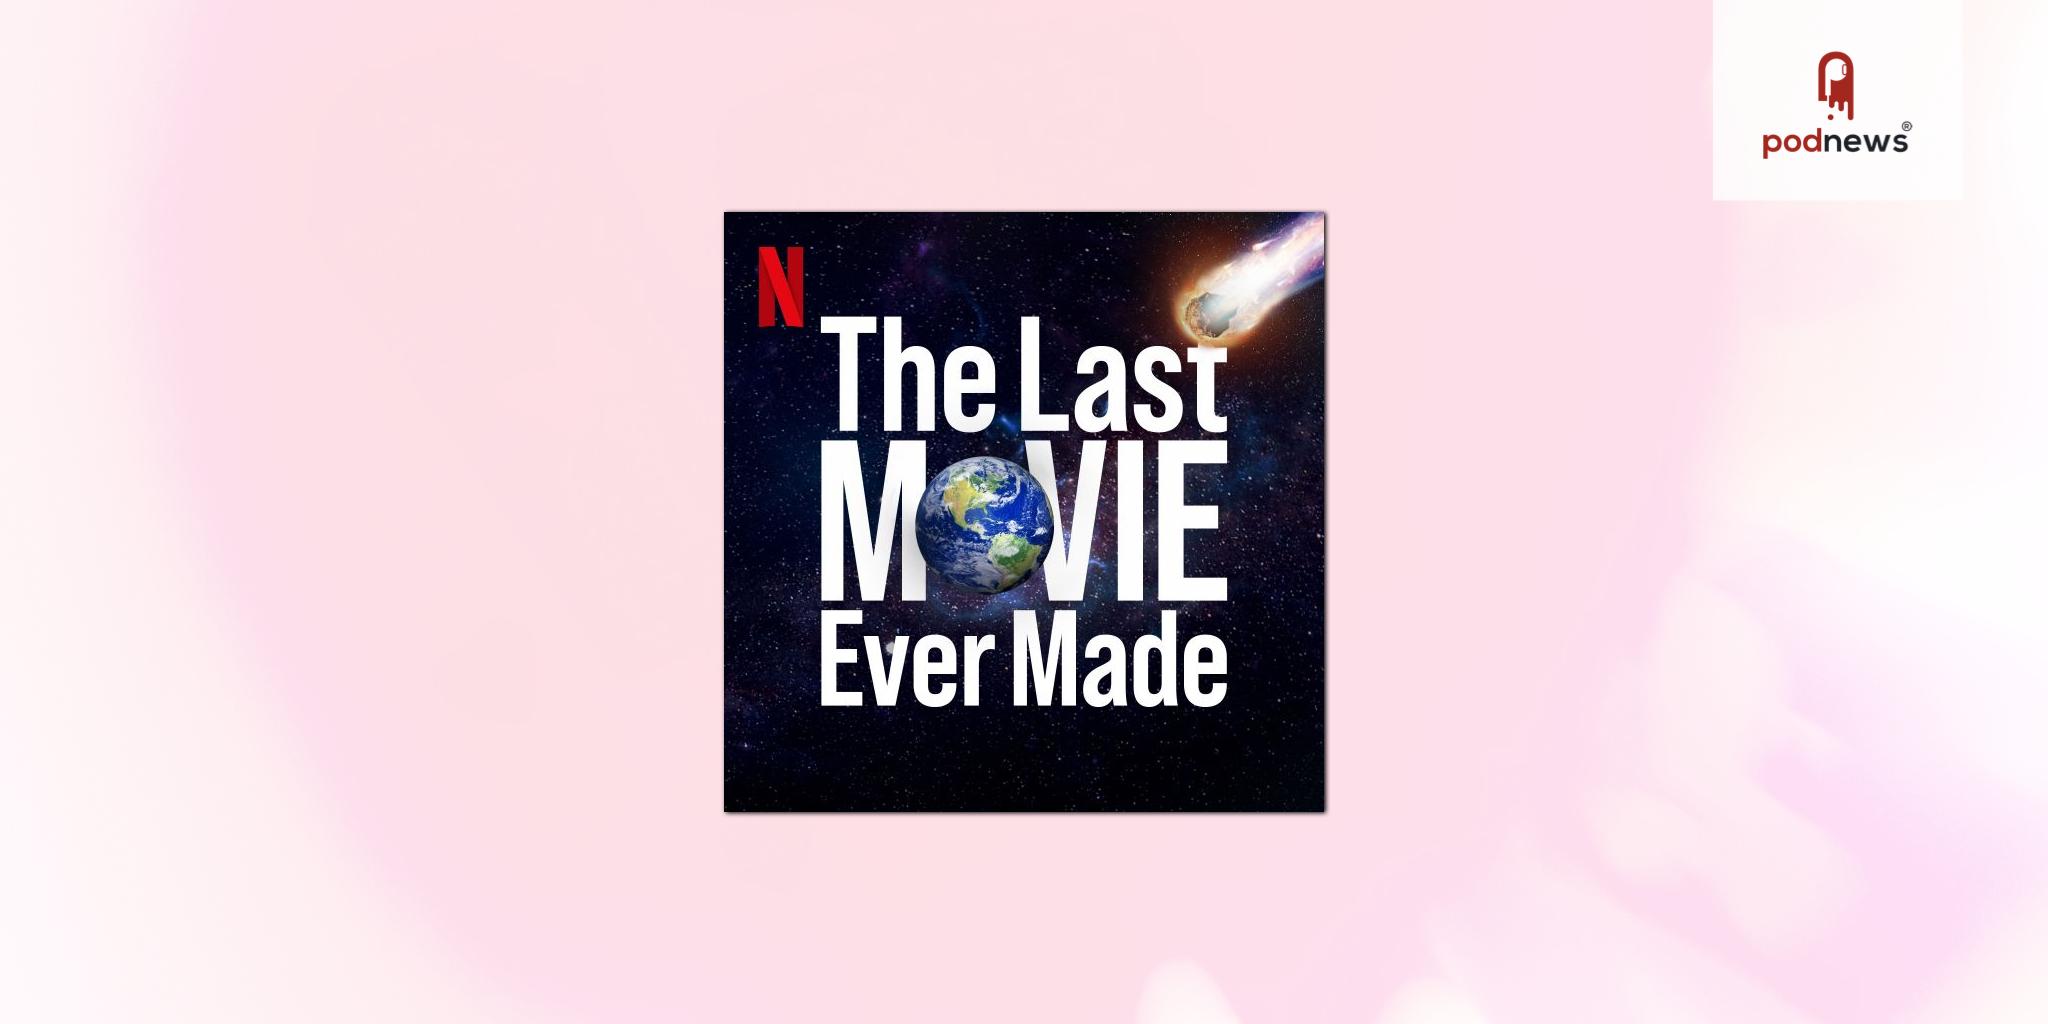 Netflix Launch The Last Movie Ever Made: The Don’t Look Up Podcast